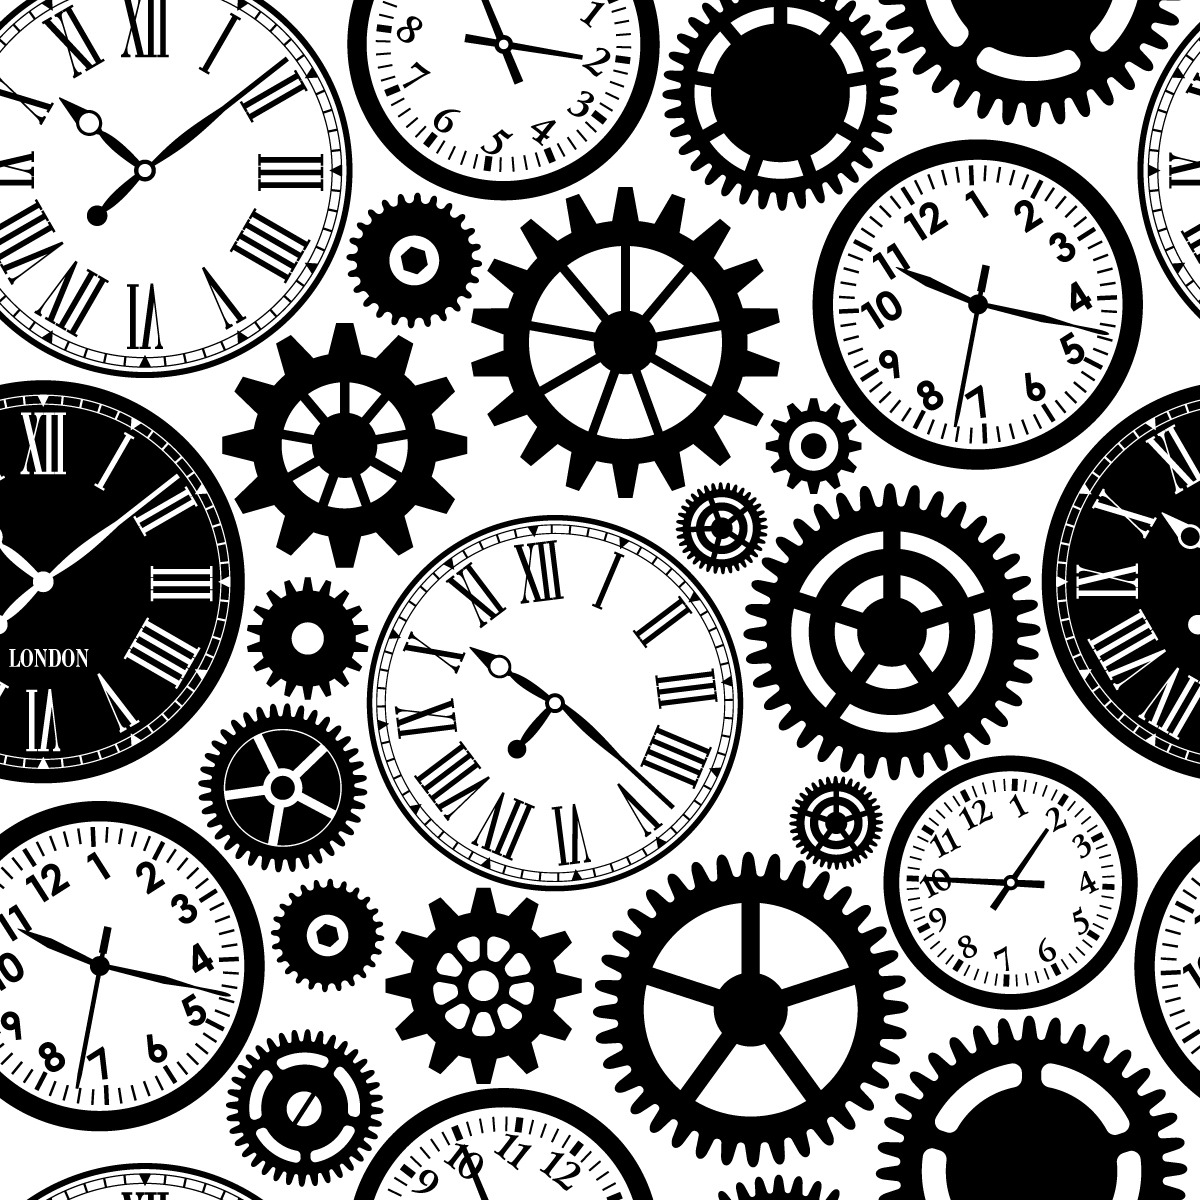 A graphic of several clocks and gears in black and white.